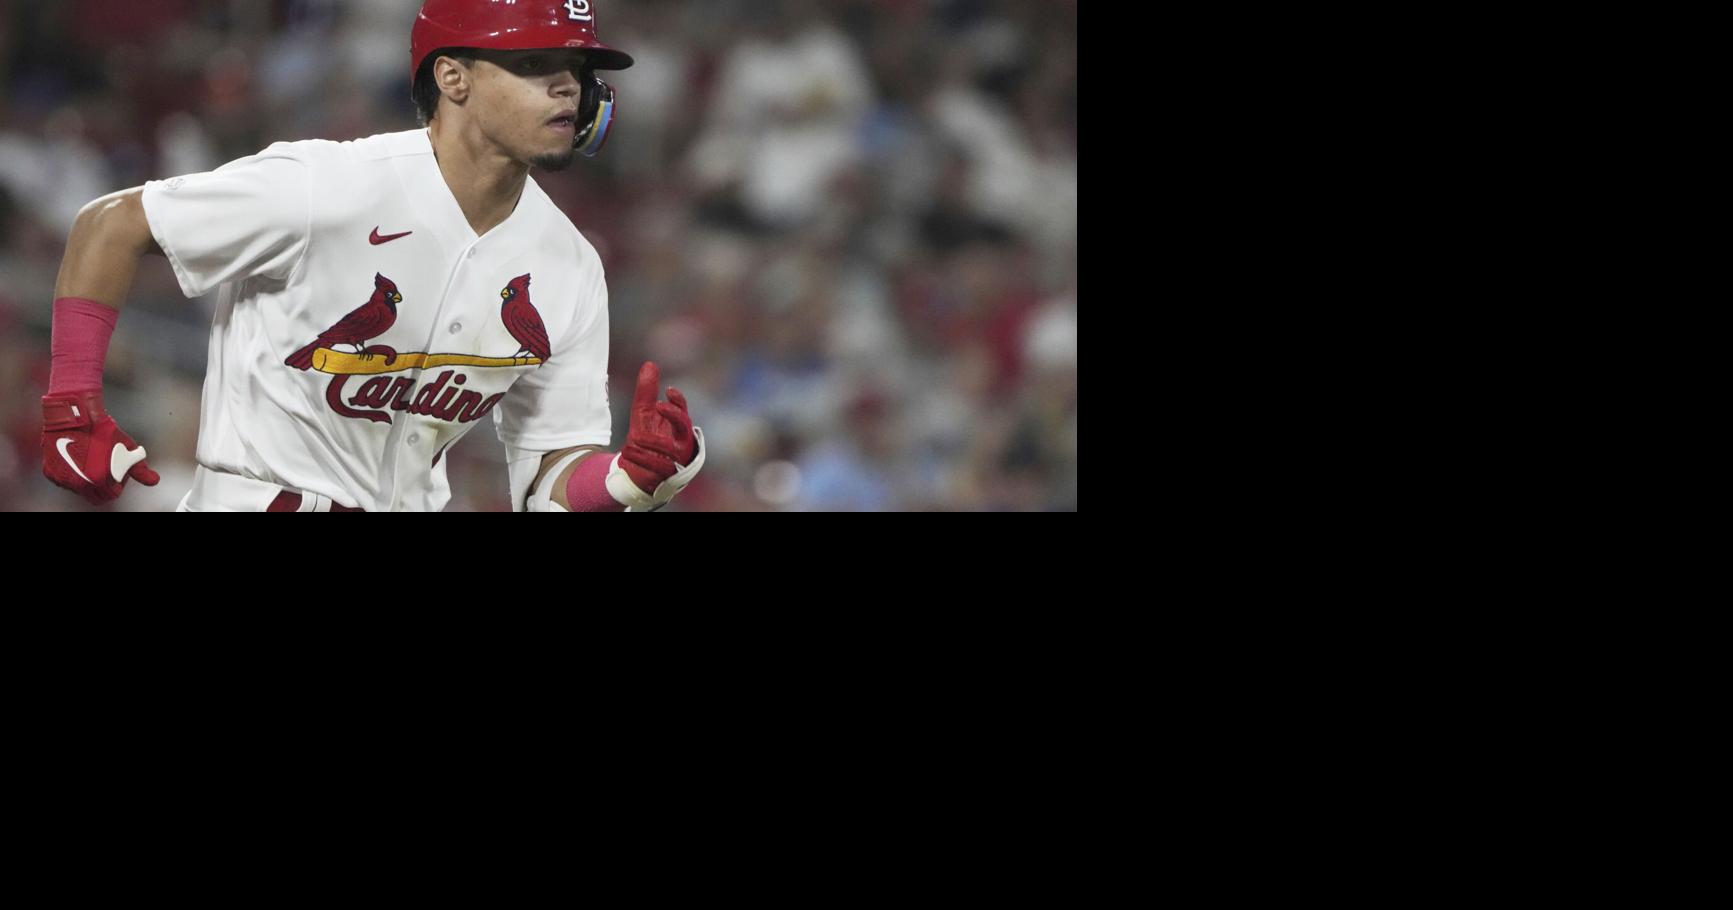 Derrick Goold on X: #STLCards unveil Pujols promotion for Sept 18 — in  plenty of time for a redesign so three bobbleheads fit together.  Wainwright, who has not said he's retiring and